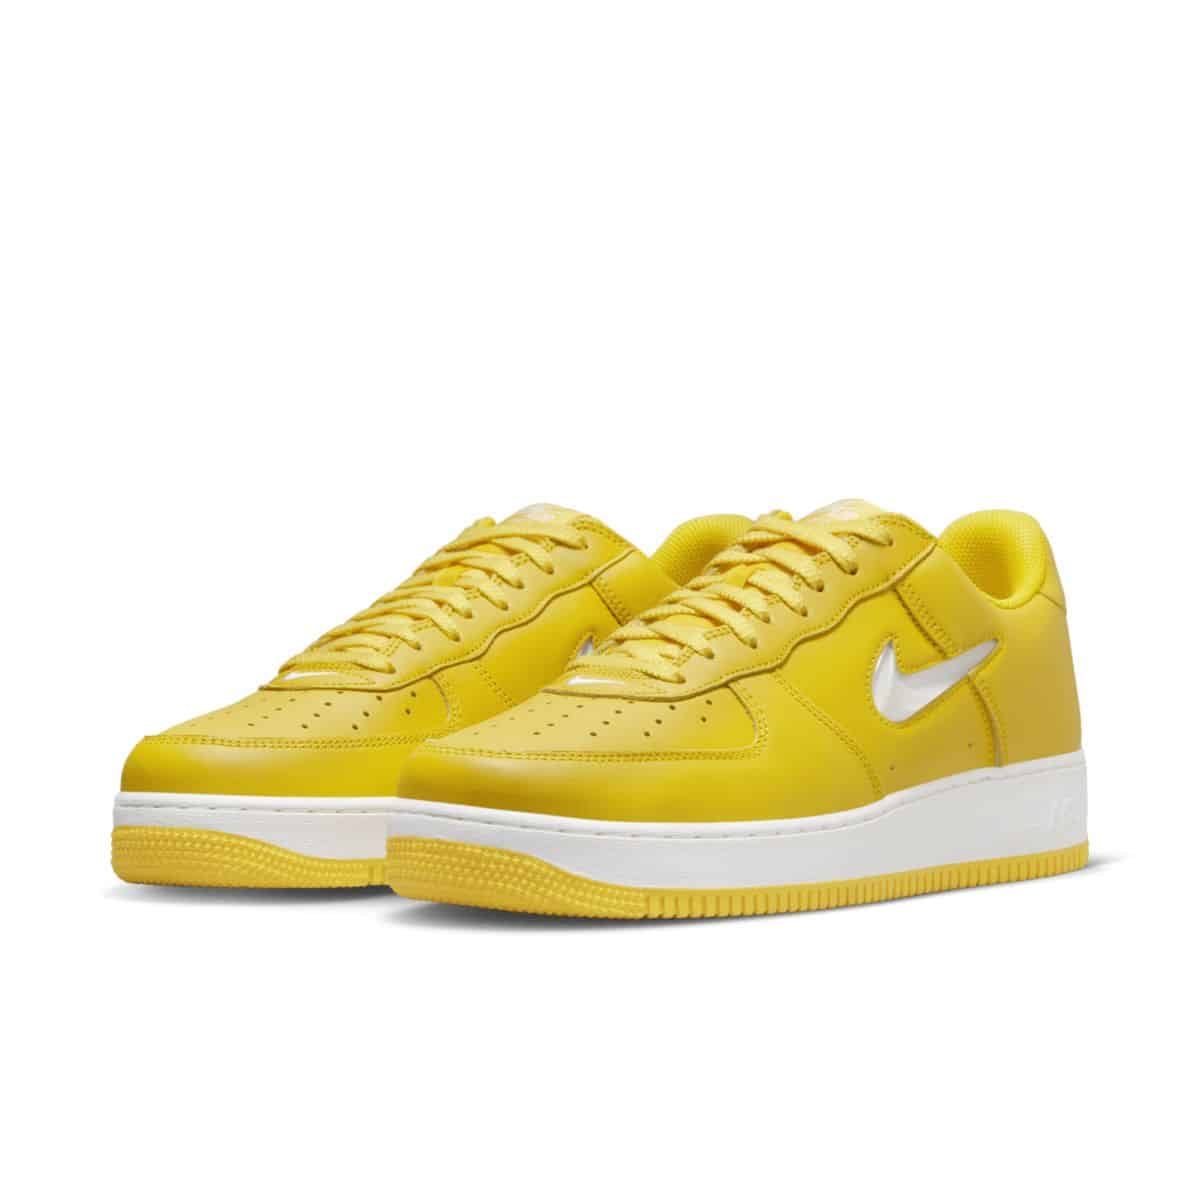 Nike Air Force 1 Low Yellow Jewel Color of the Month FJ1044-700 4